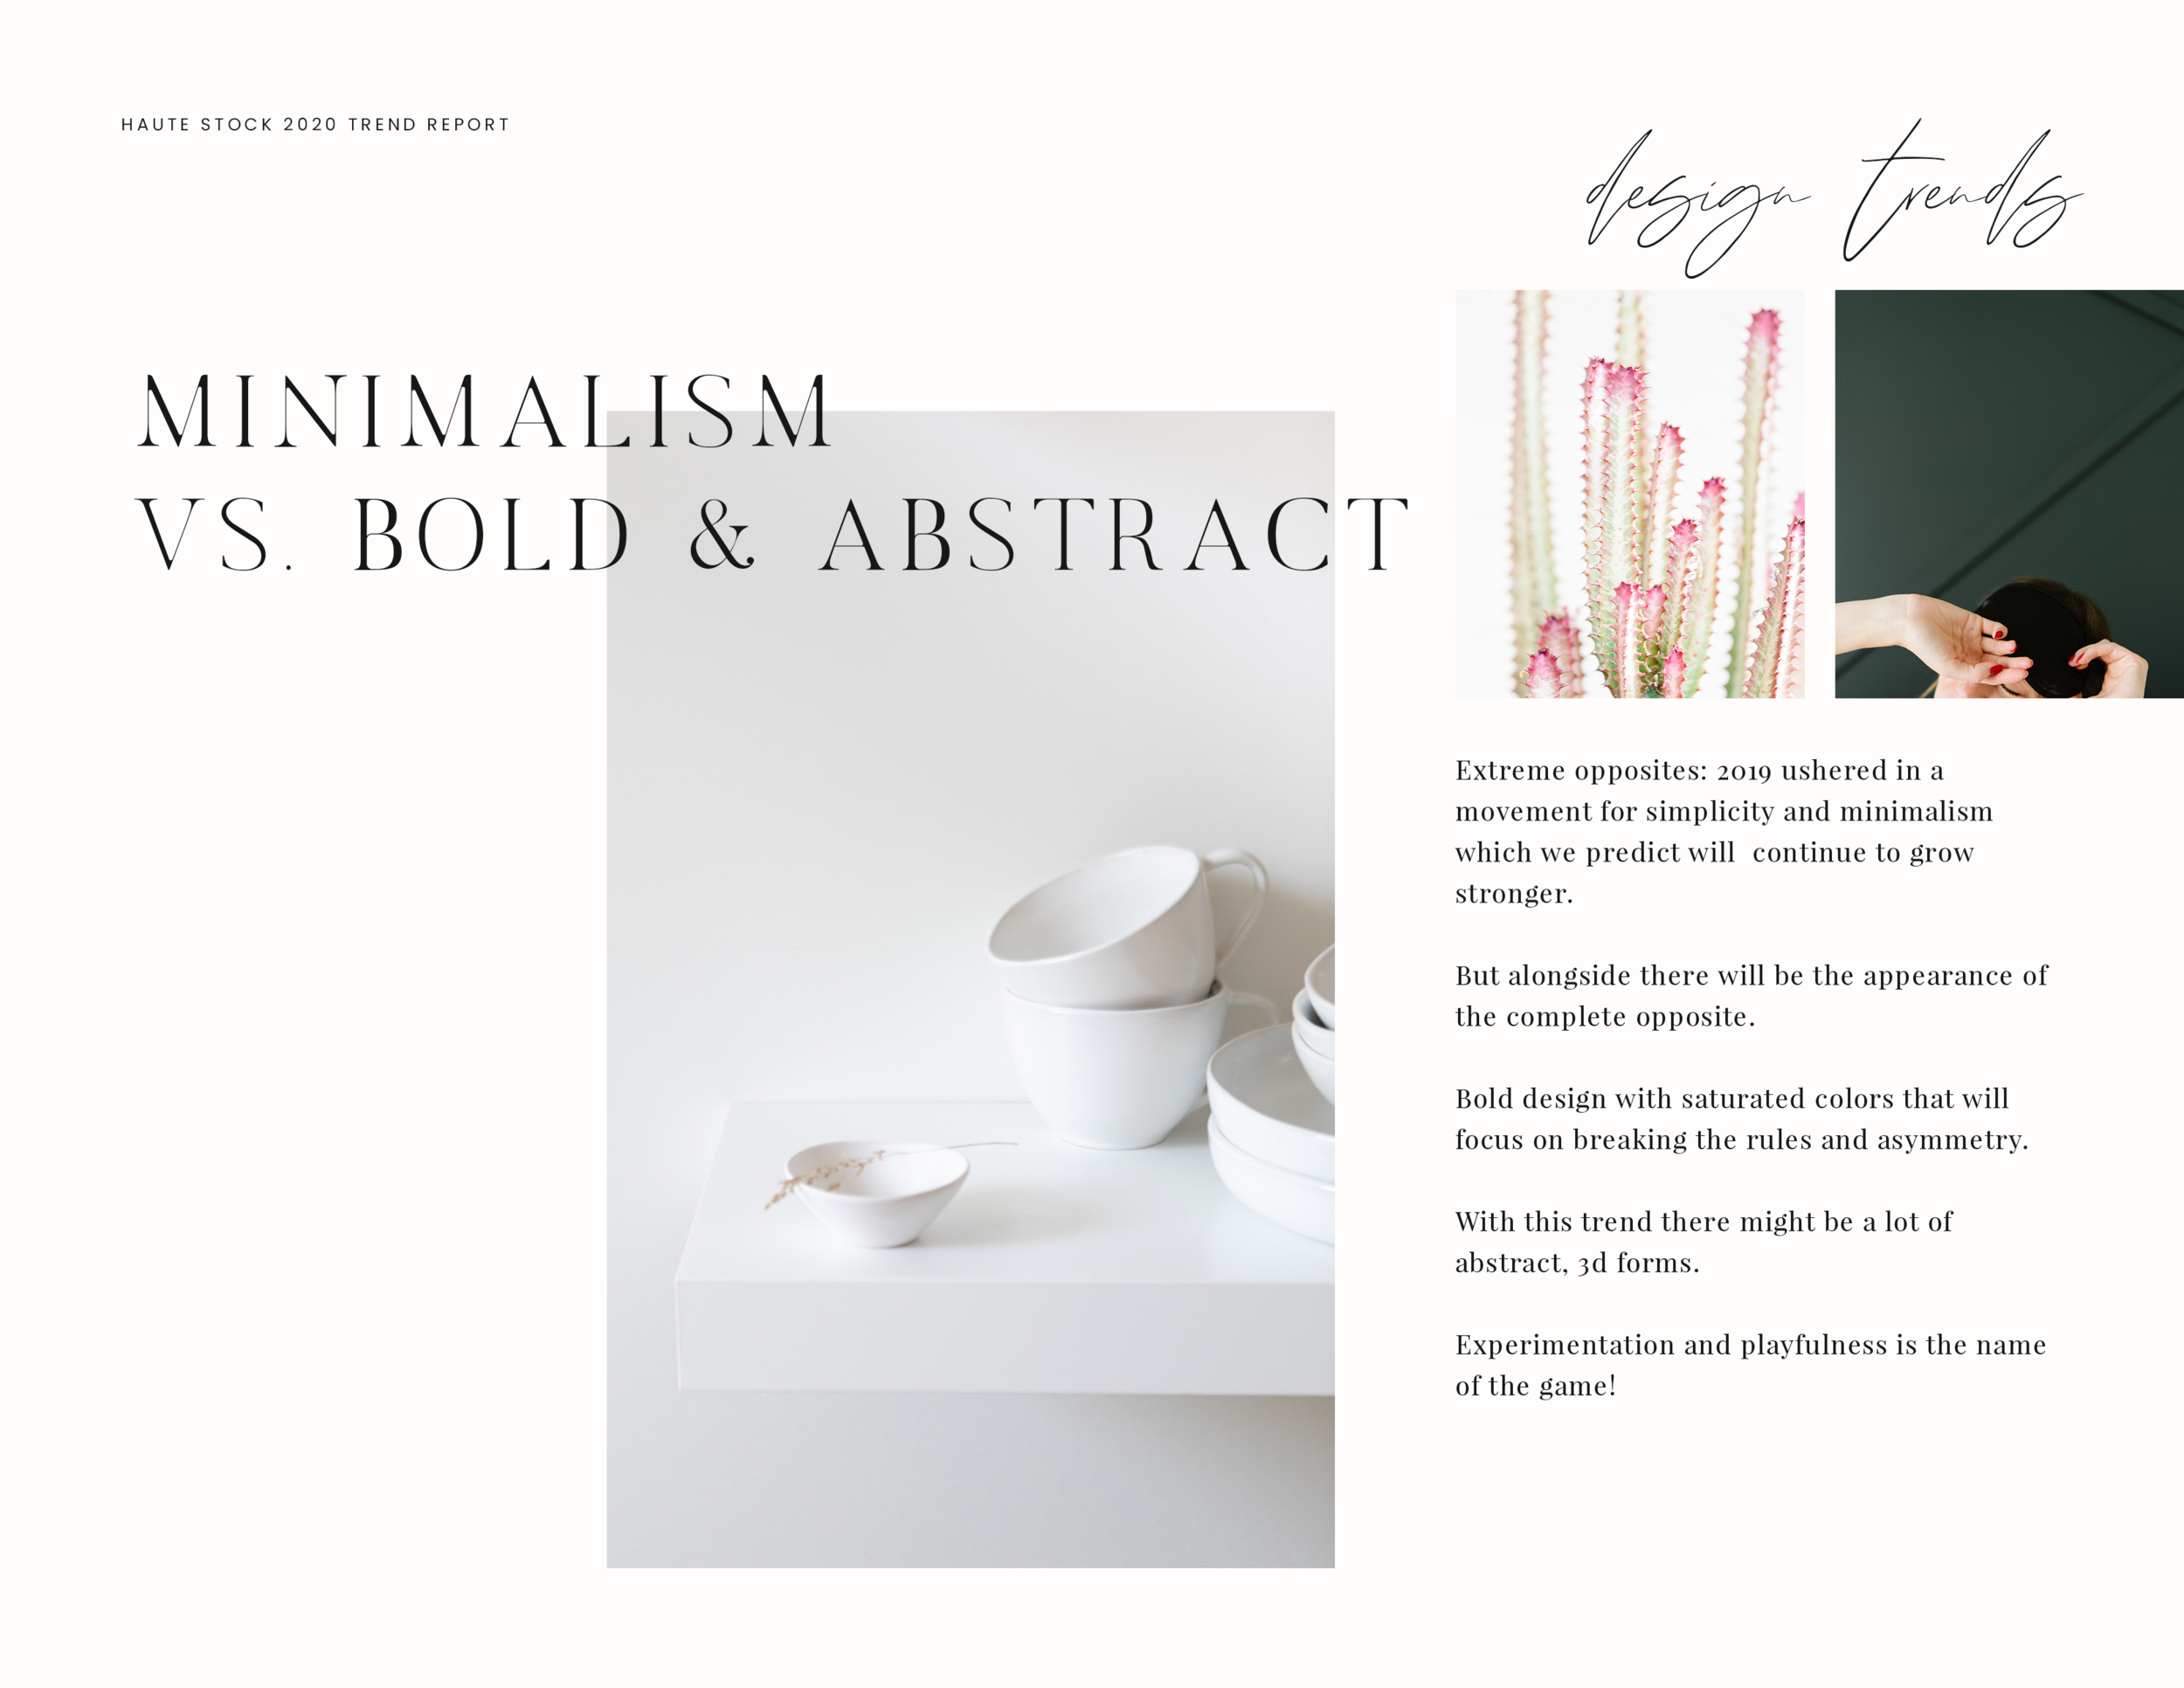 Minimalism vs. Bold and Abstract will be a popular design trends in 2020.